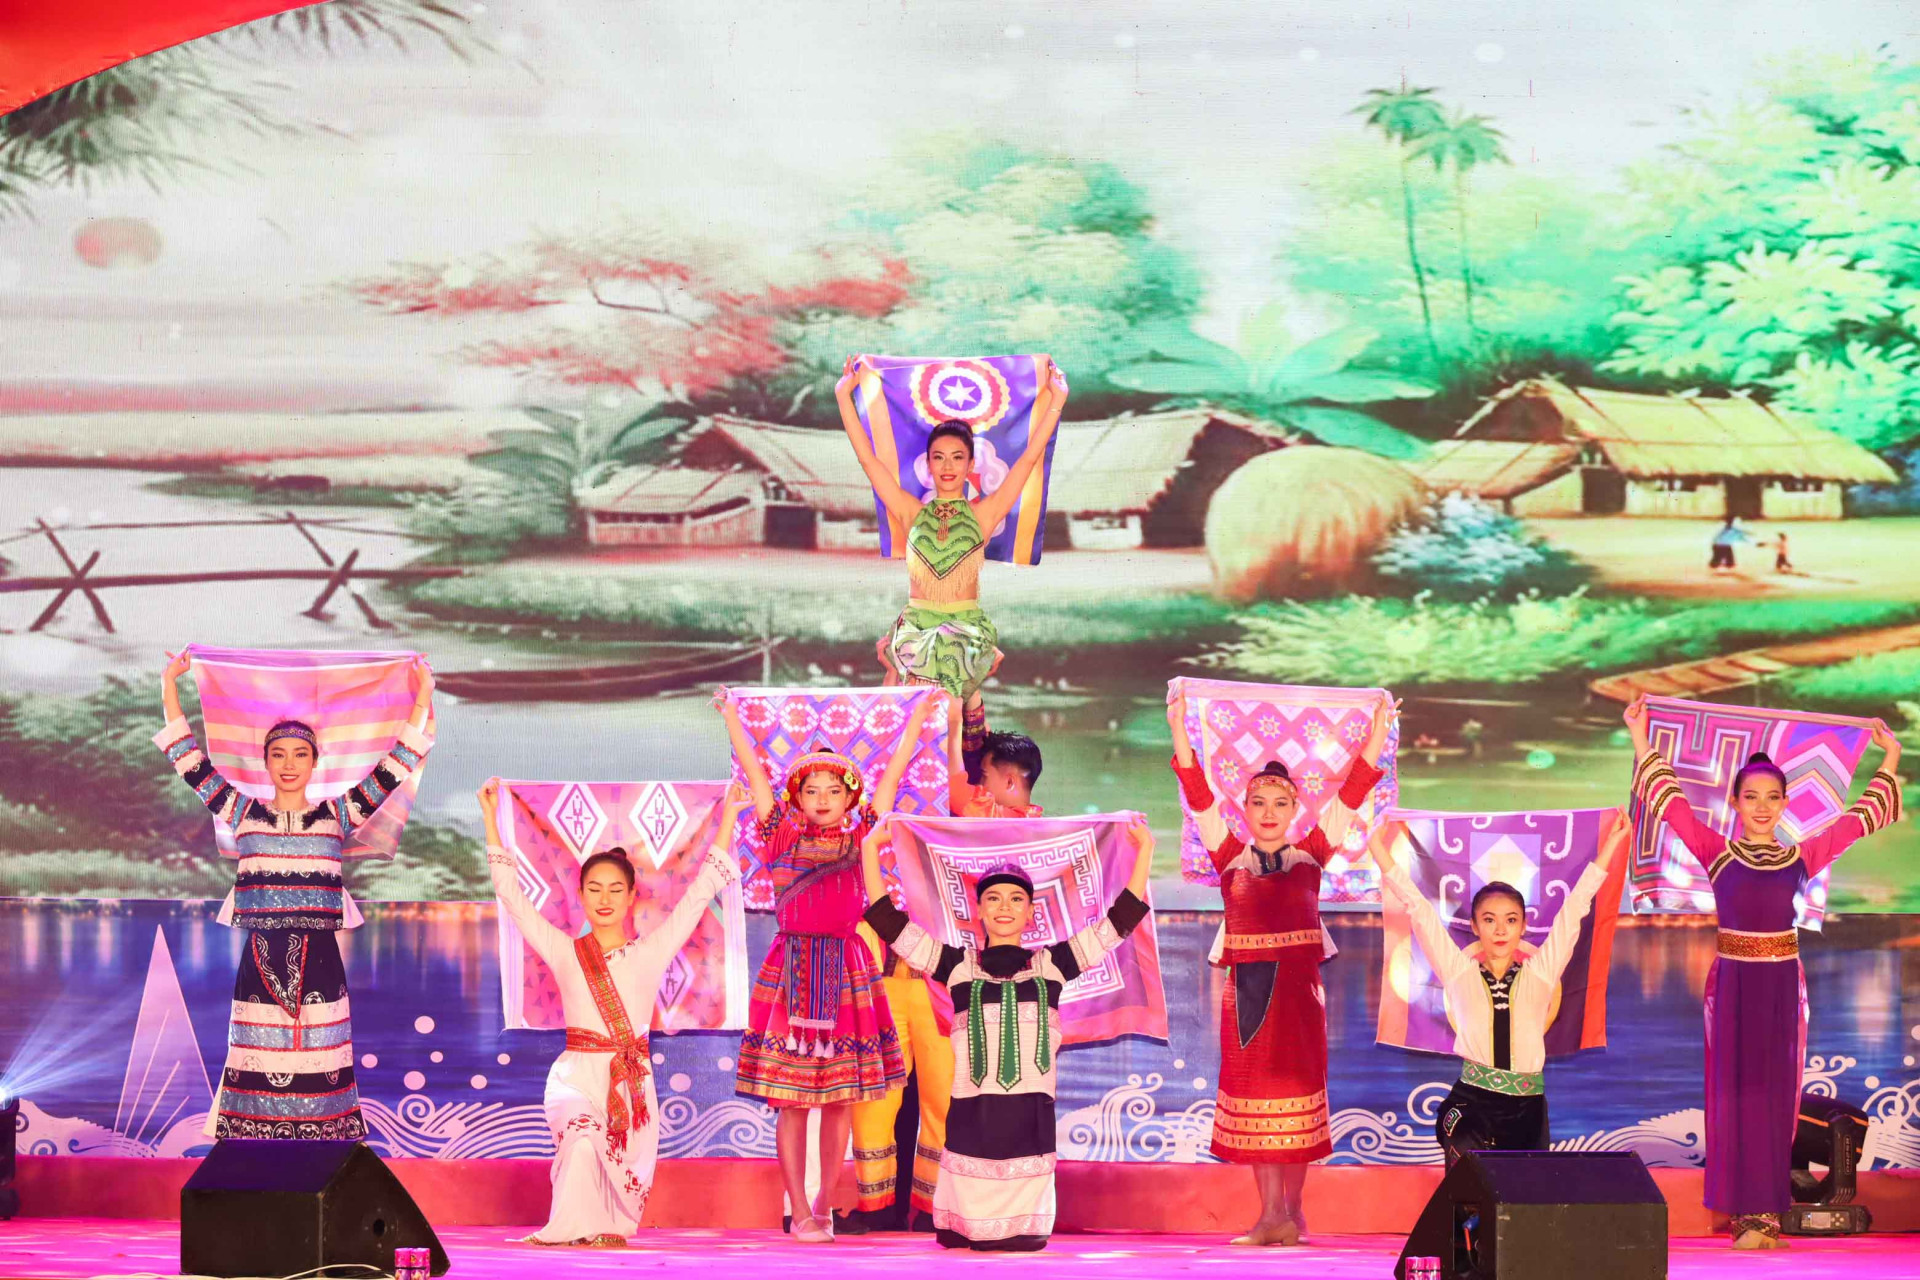 A performance about Vietnamese ethnic groups